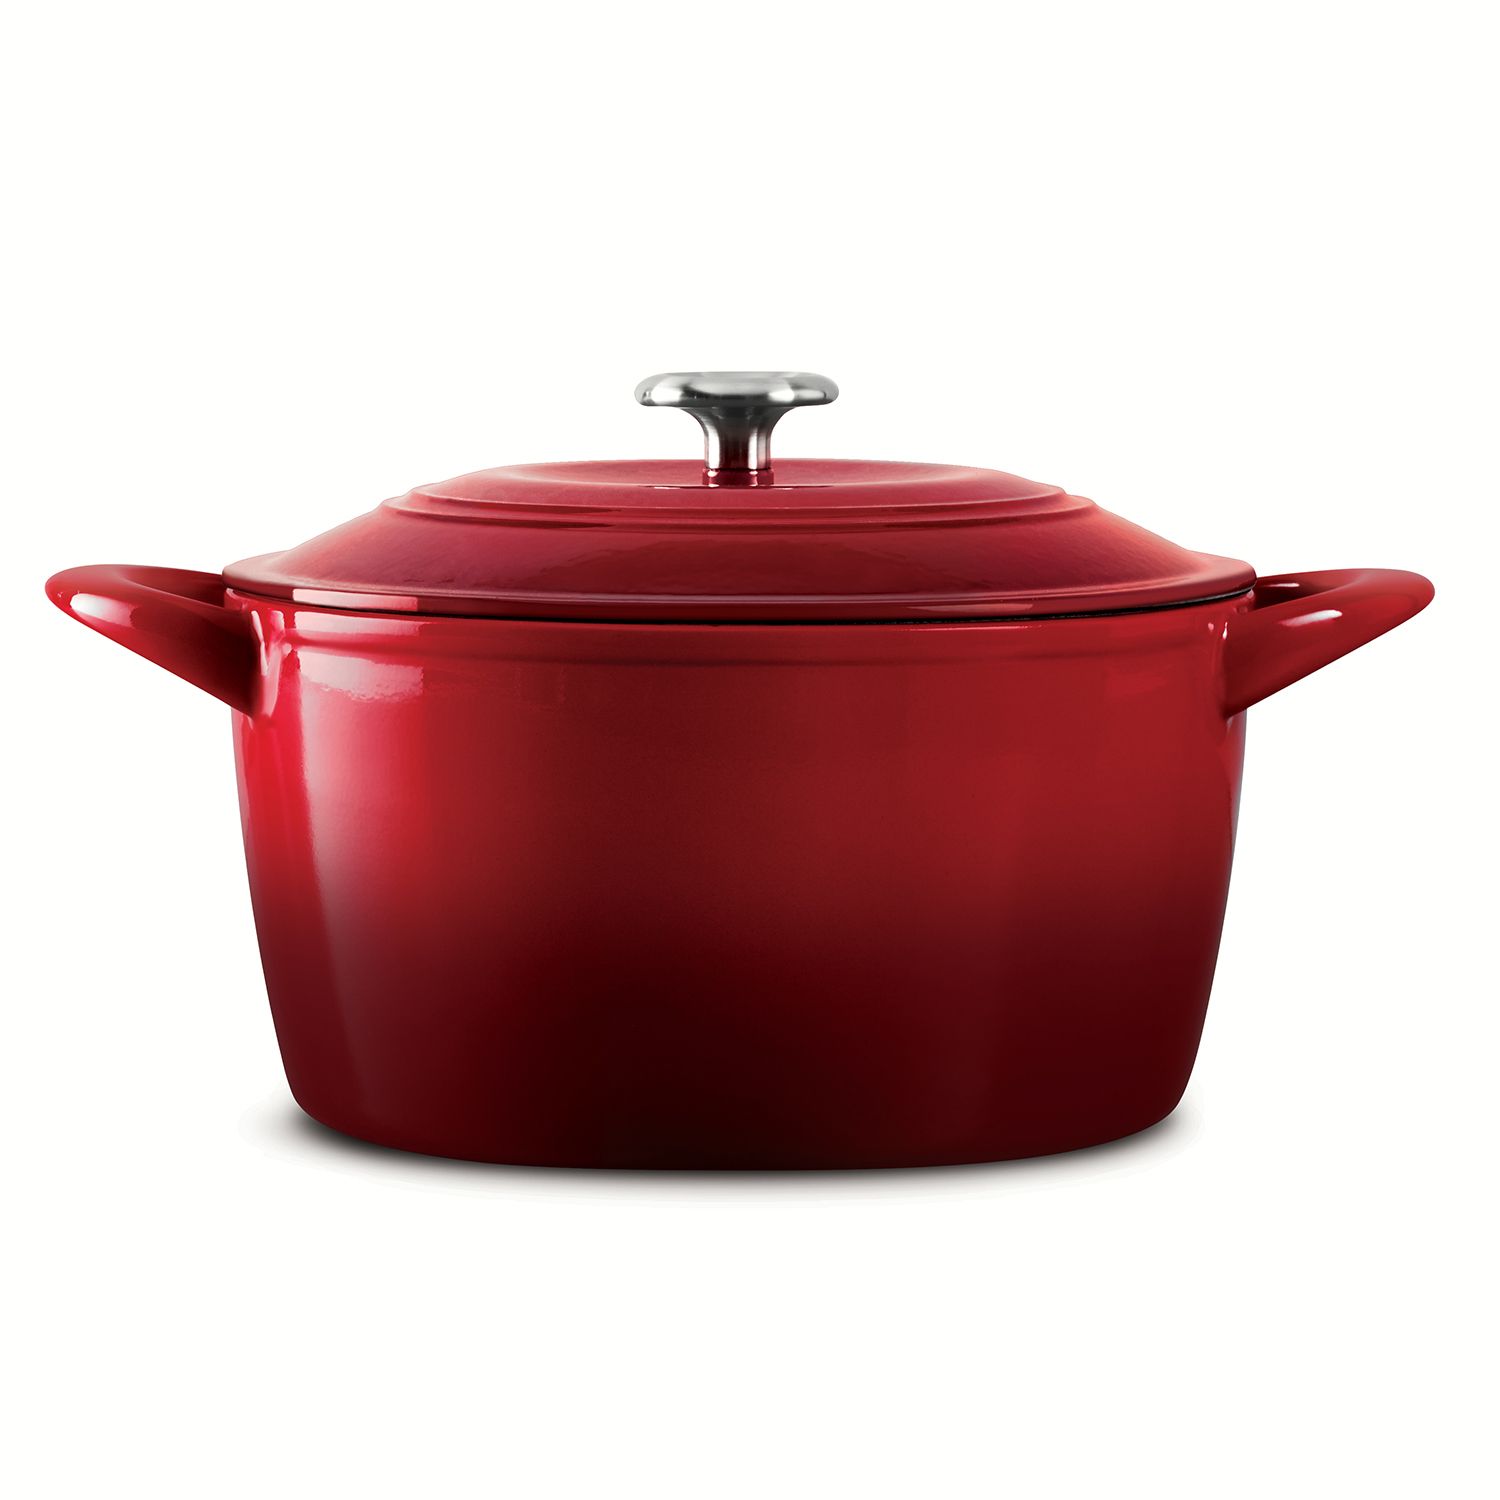 Tramontina Enameled Cast Iron 6.5 Qt Covered Round Dutch Oven Red 